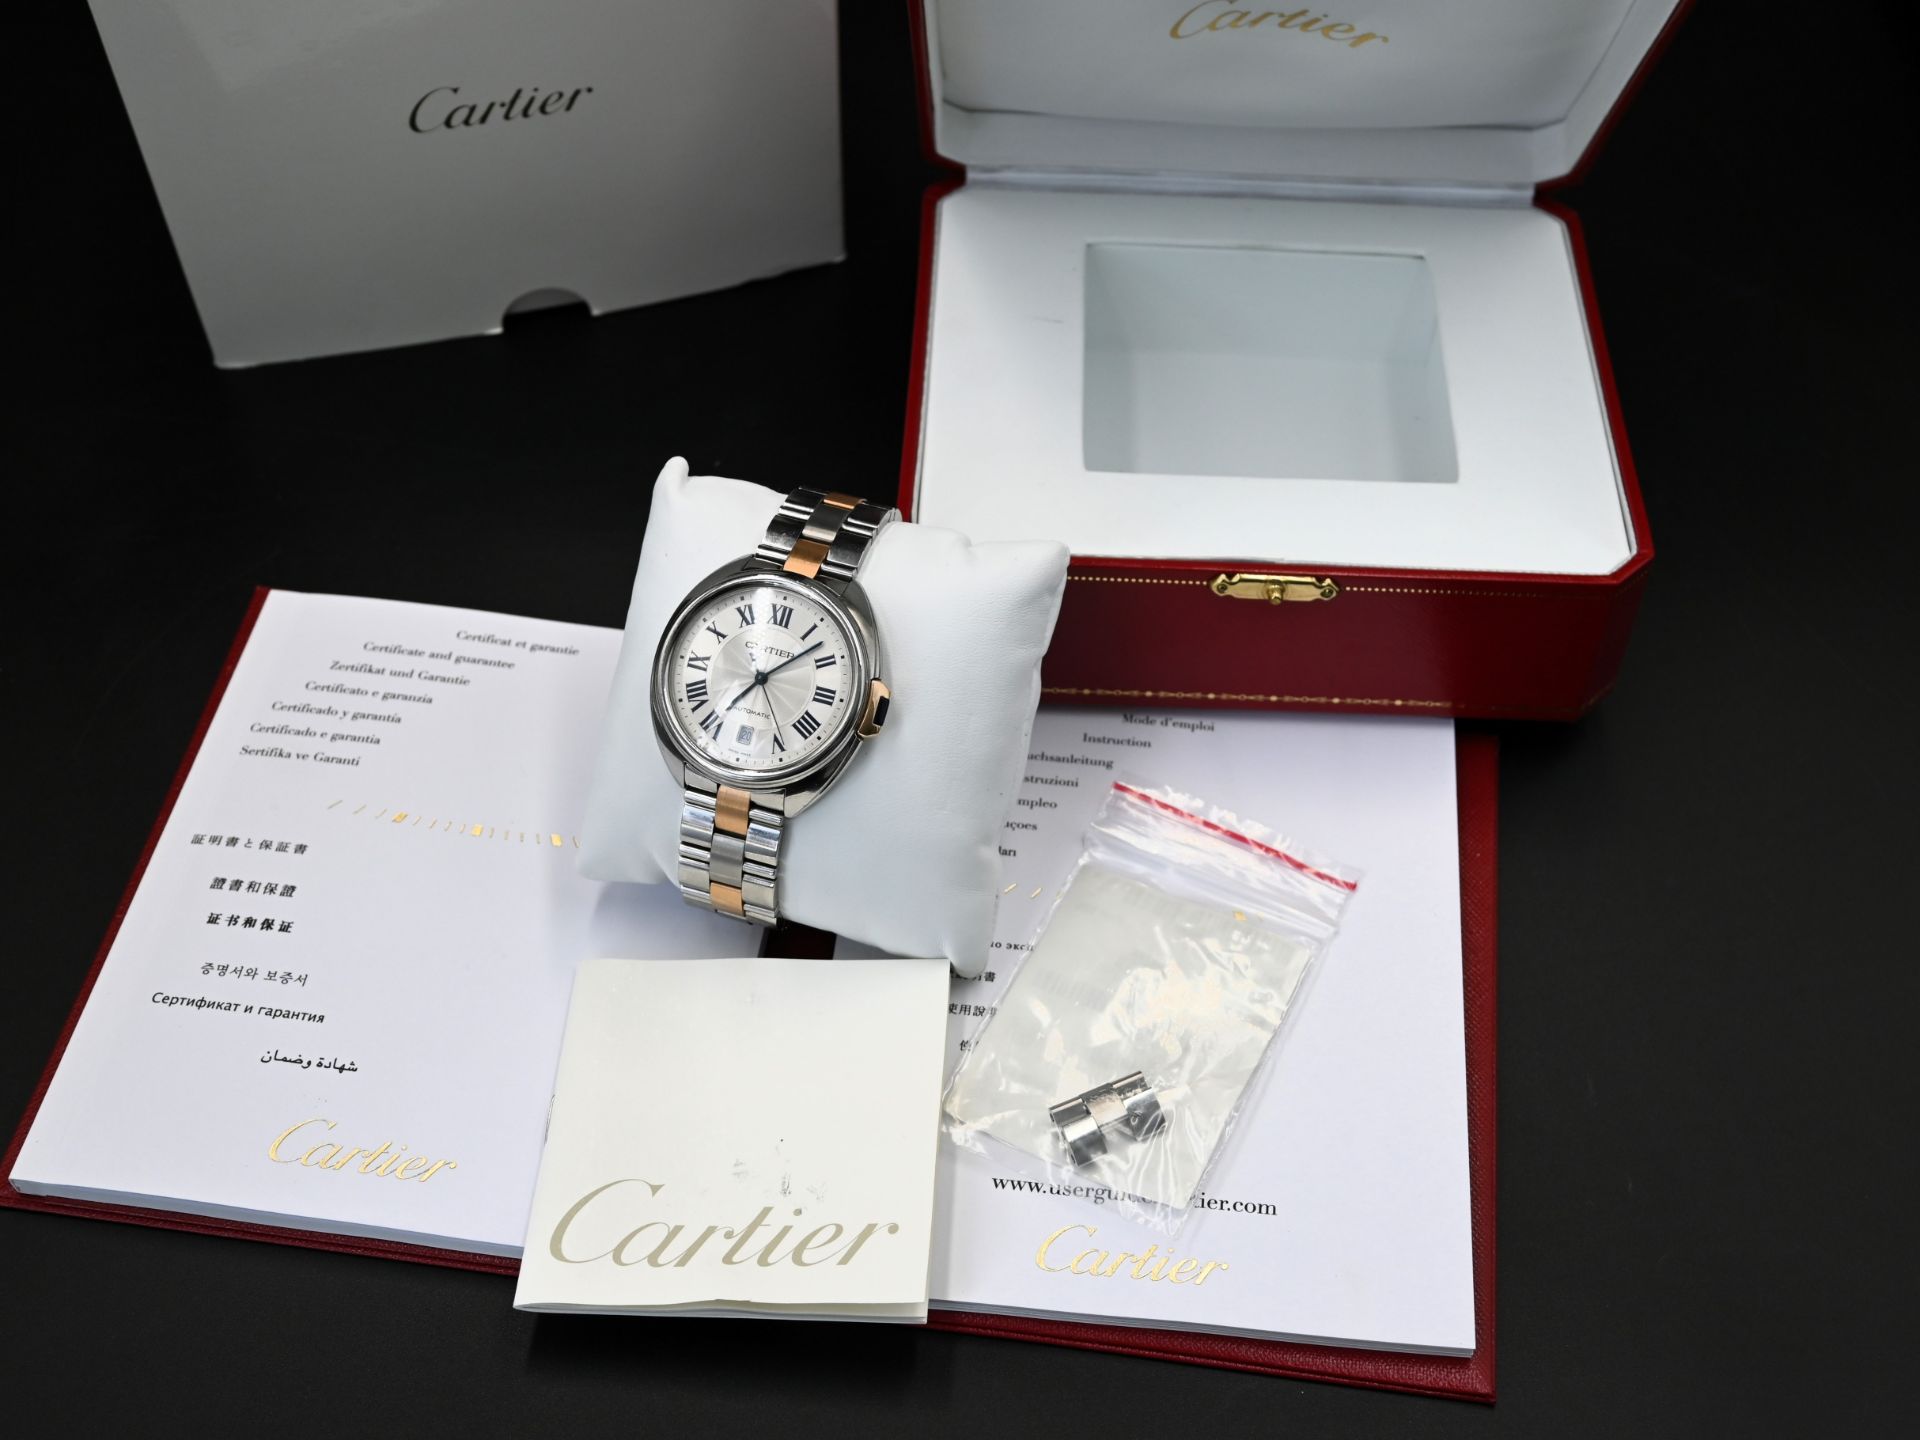 Cartier Cle de Cartier watch with 1847 MC movement with certificate of guarantee, user guide, - Image 3 of 5